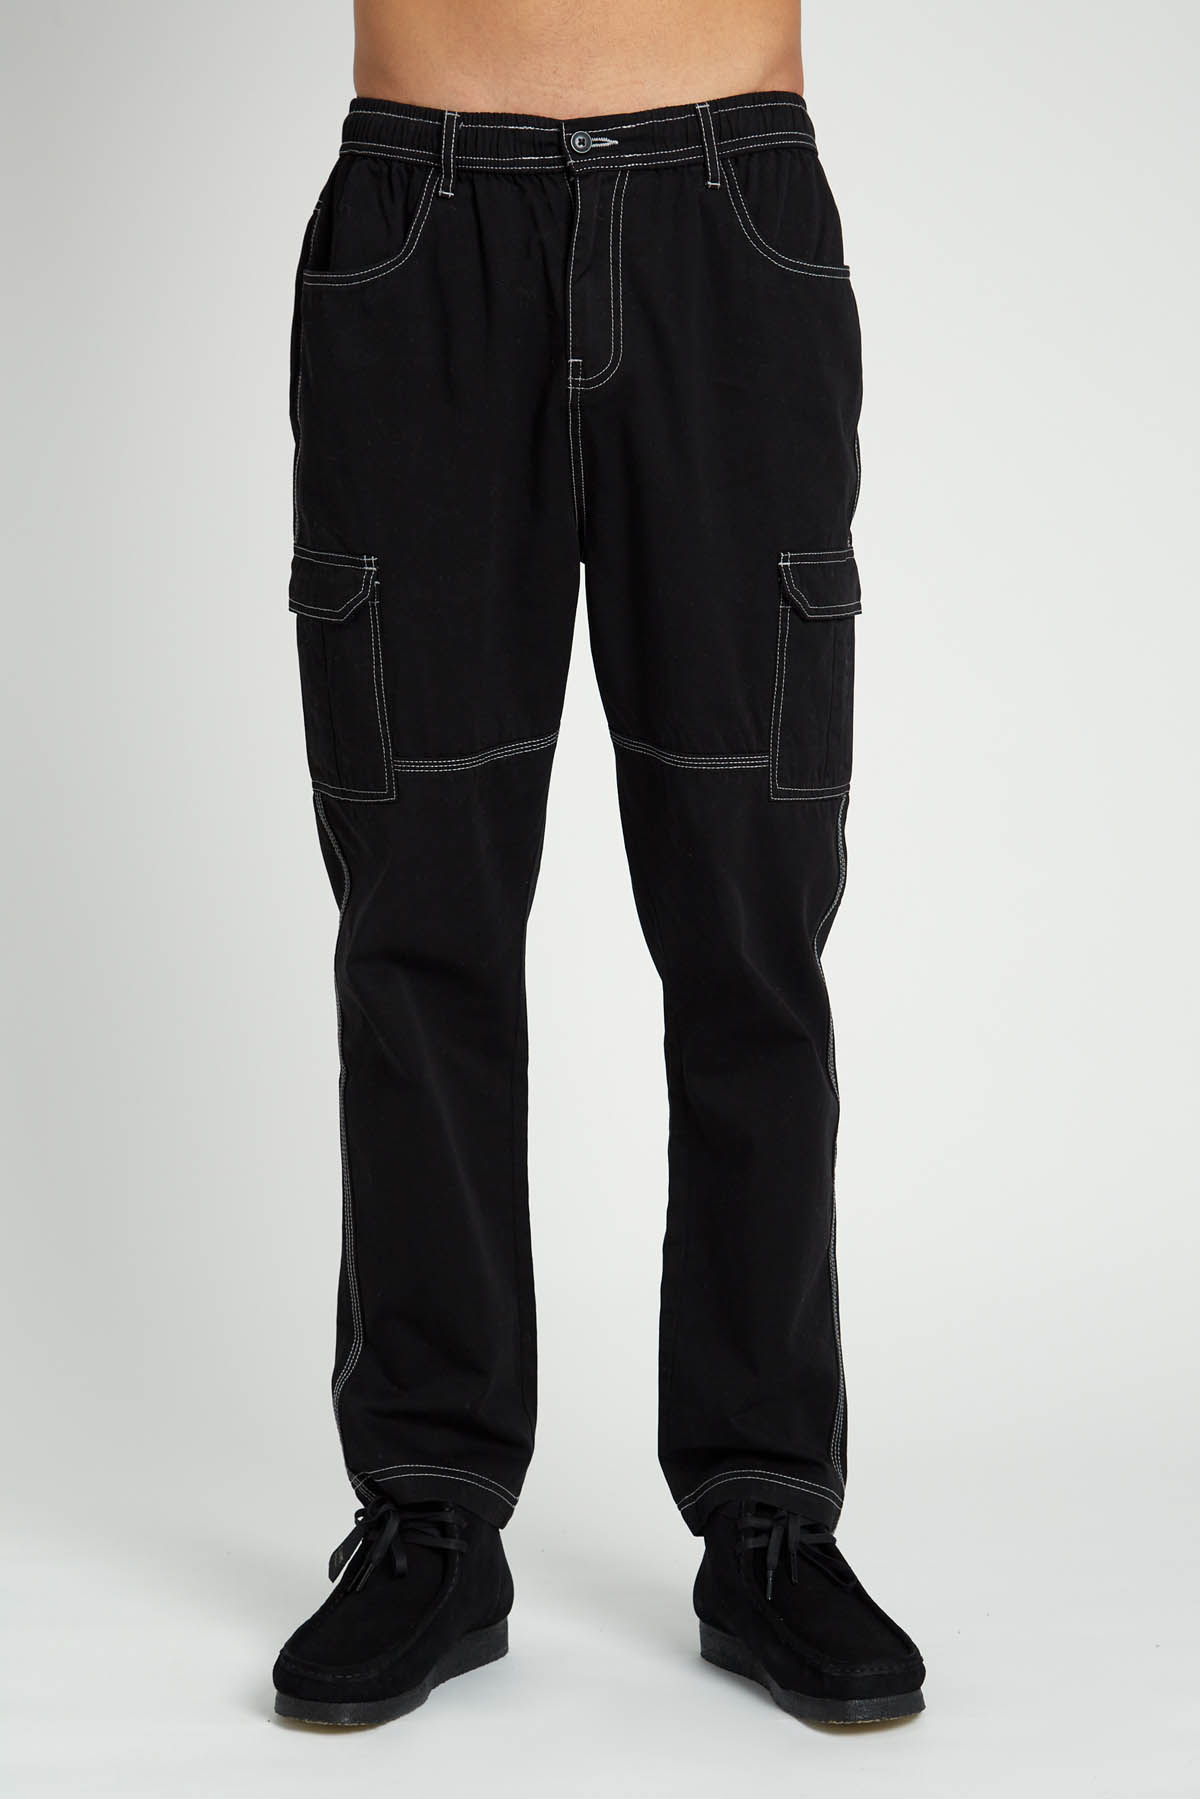 Glover Trouser With Contrast Stitch l Influence Fashion New Season AW23